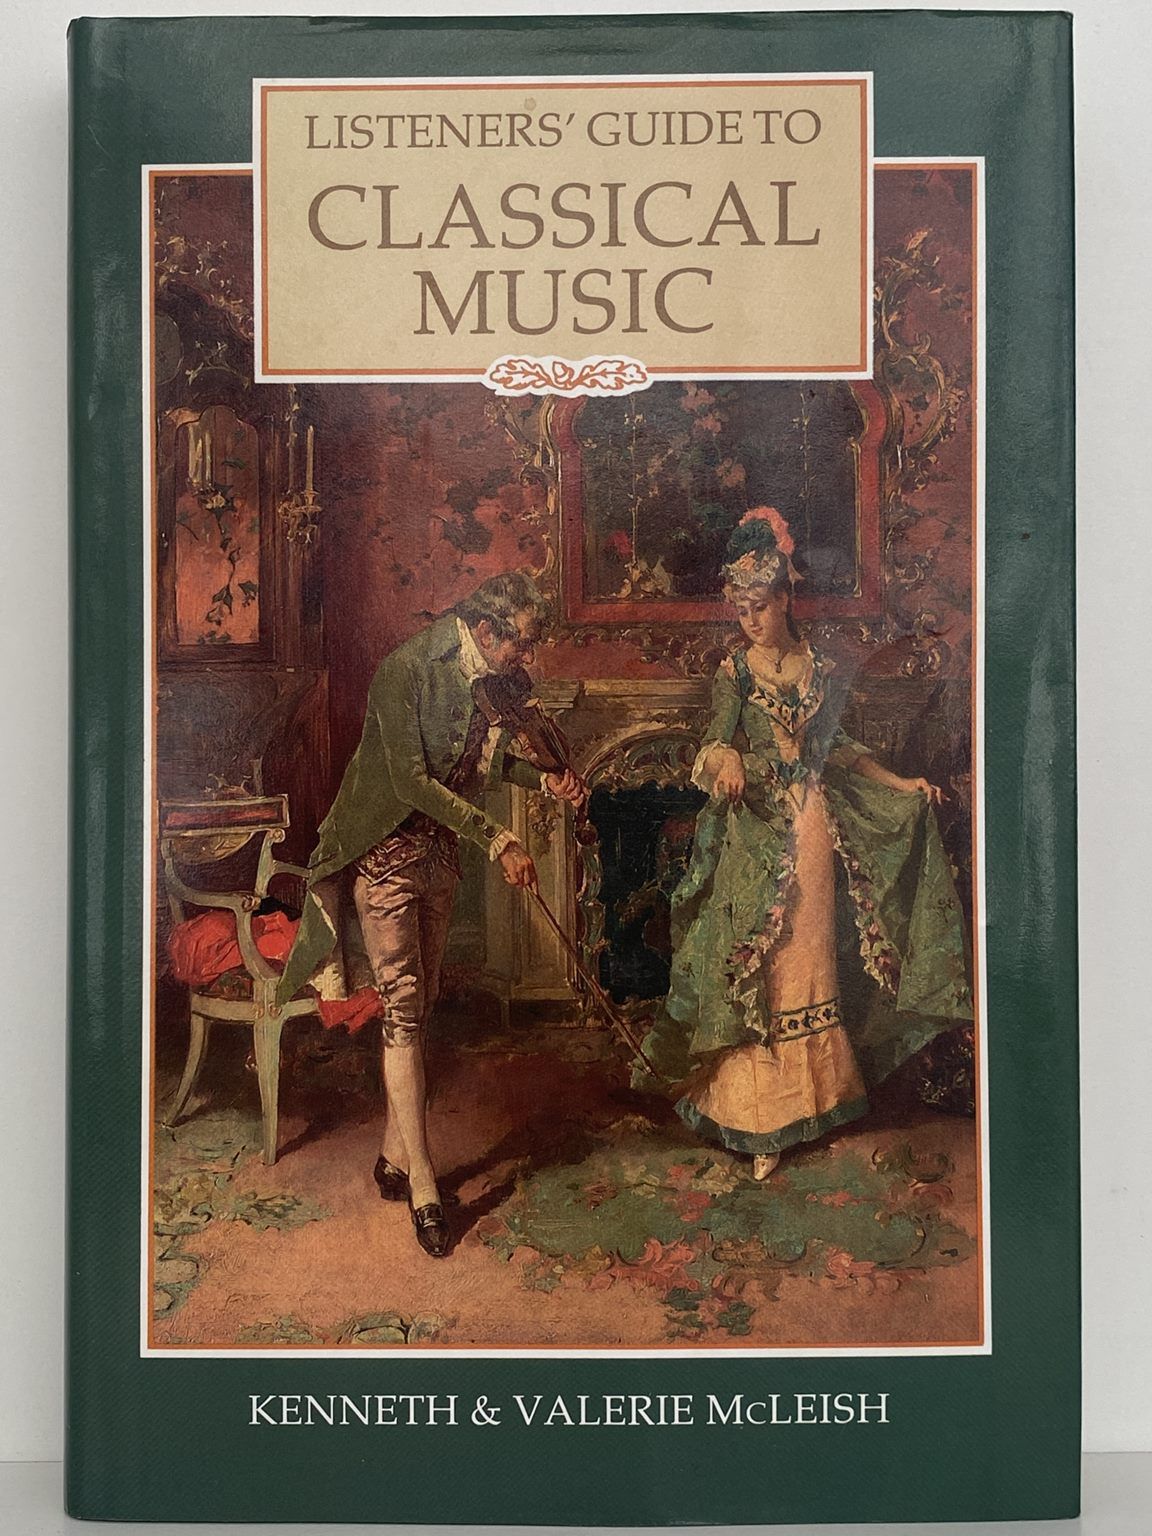 Listeners' Guide to Classical Music